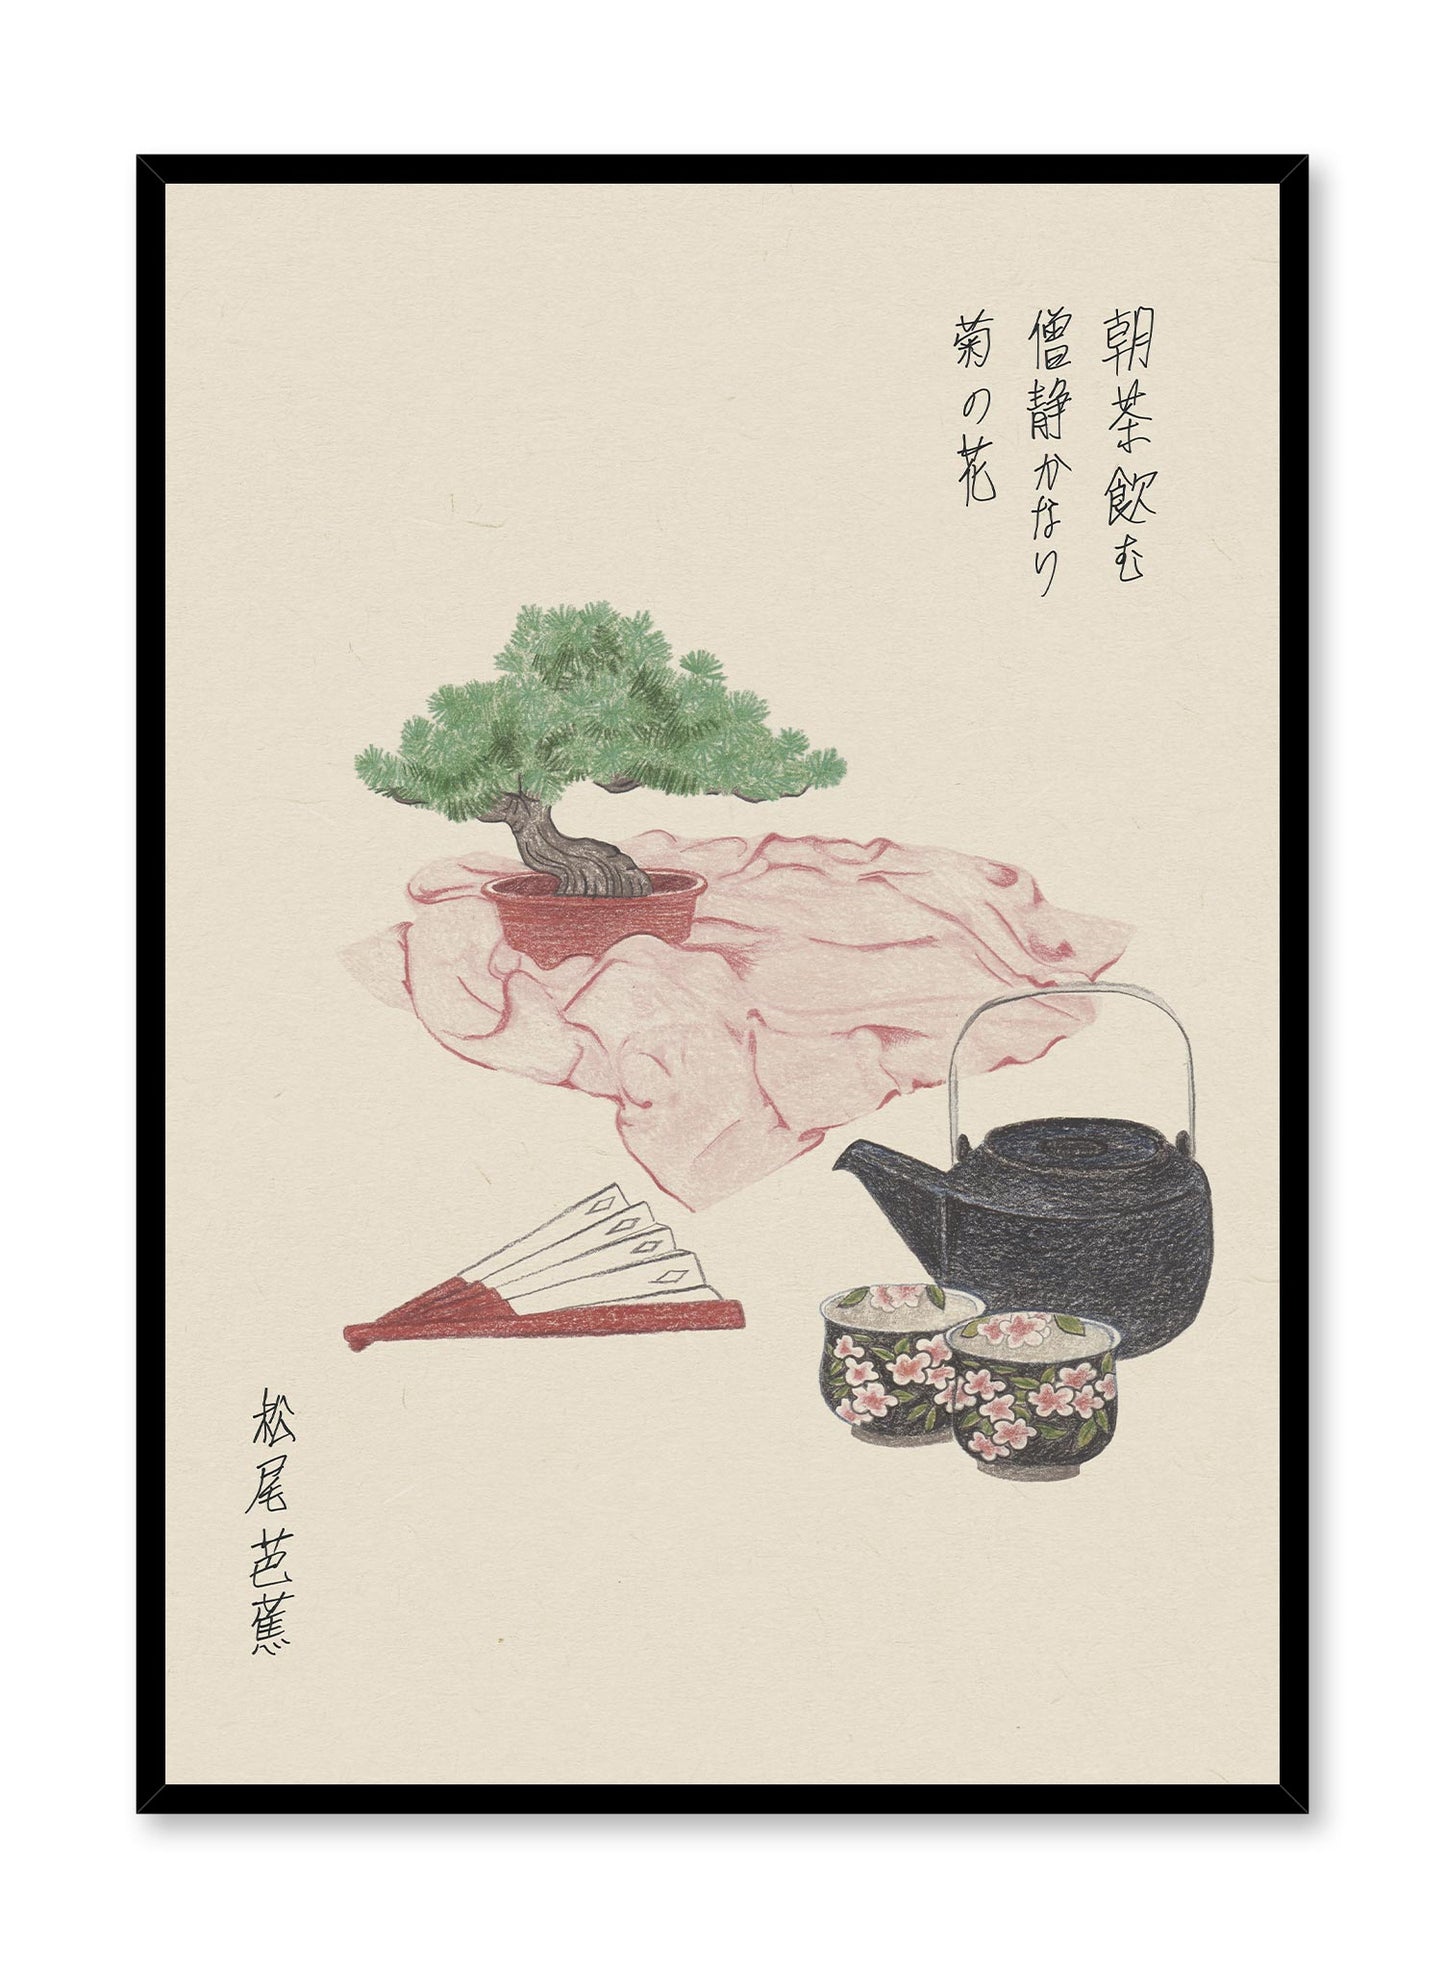 Tradition is a minimalist illustration by Opposite Wall of a small bonsai tree next to a tea set and a fan.